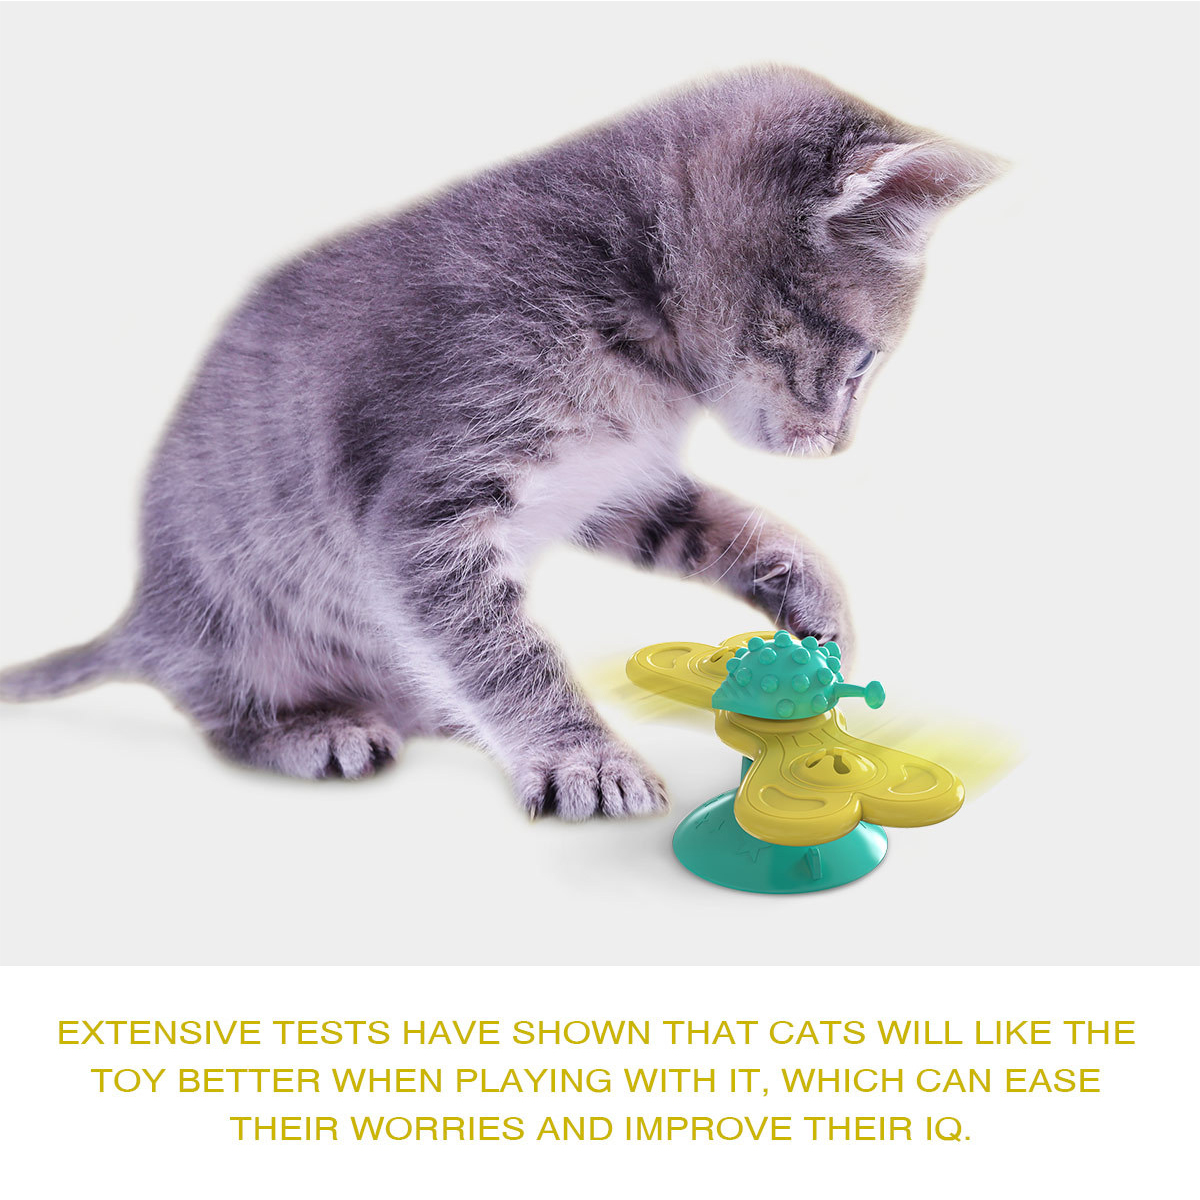 Windmill-Cat-Toy-Funny-Turntable-Teasing-Pet-Toy-Scratching-Tickle-Cats-Hair-Brush-Cat-Toys-Interact-1791497-11